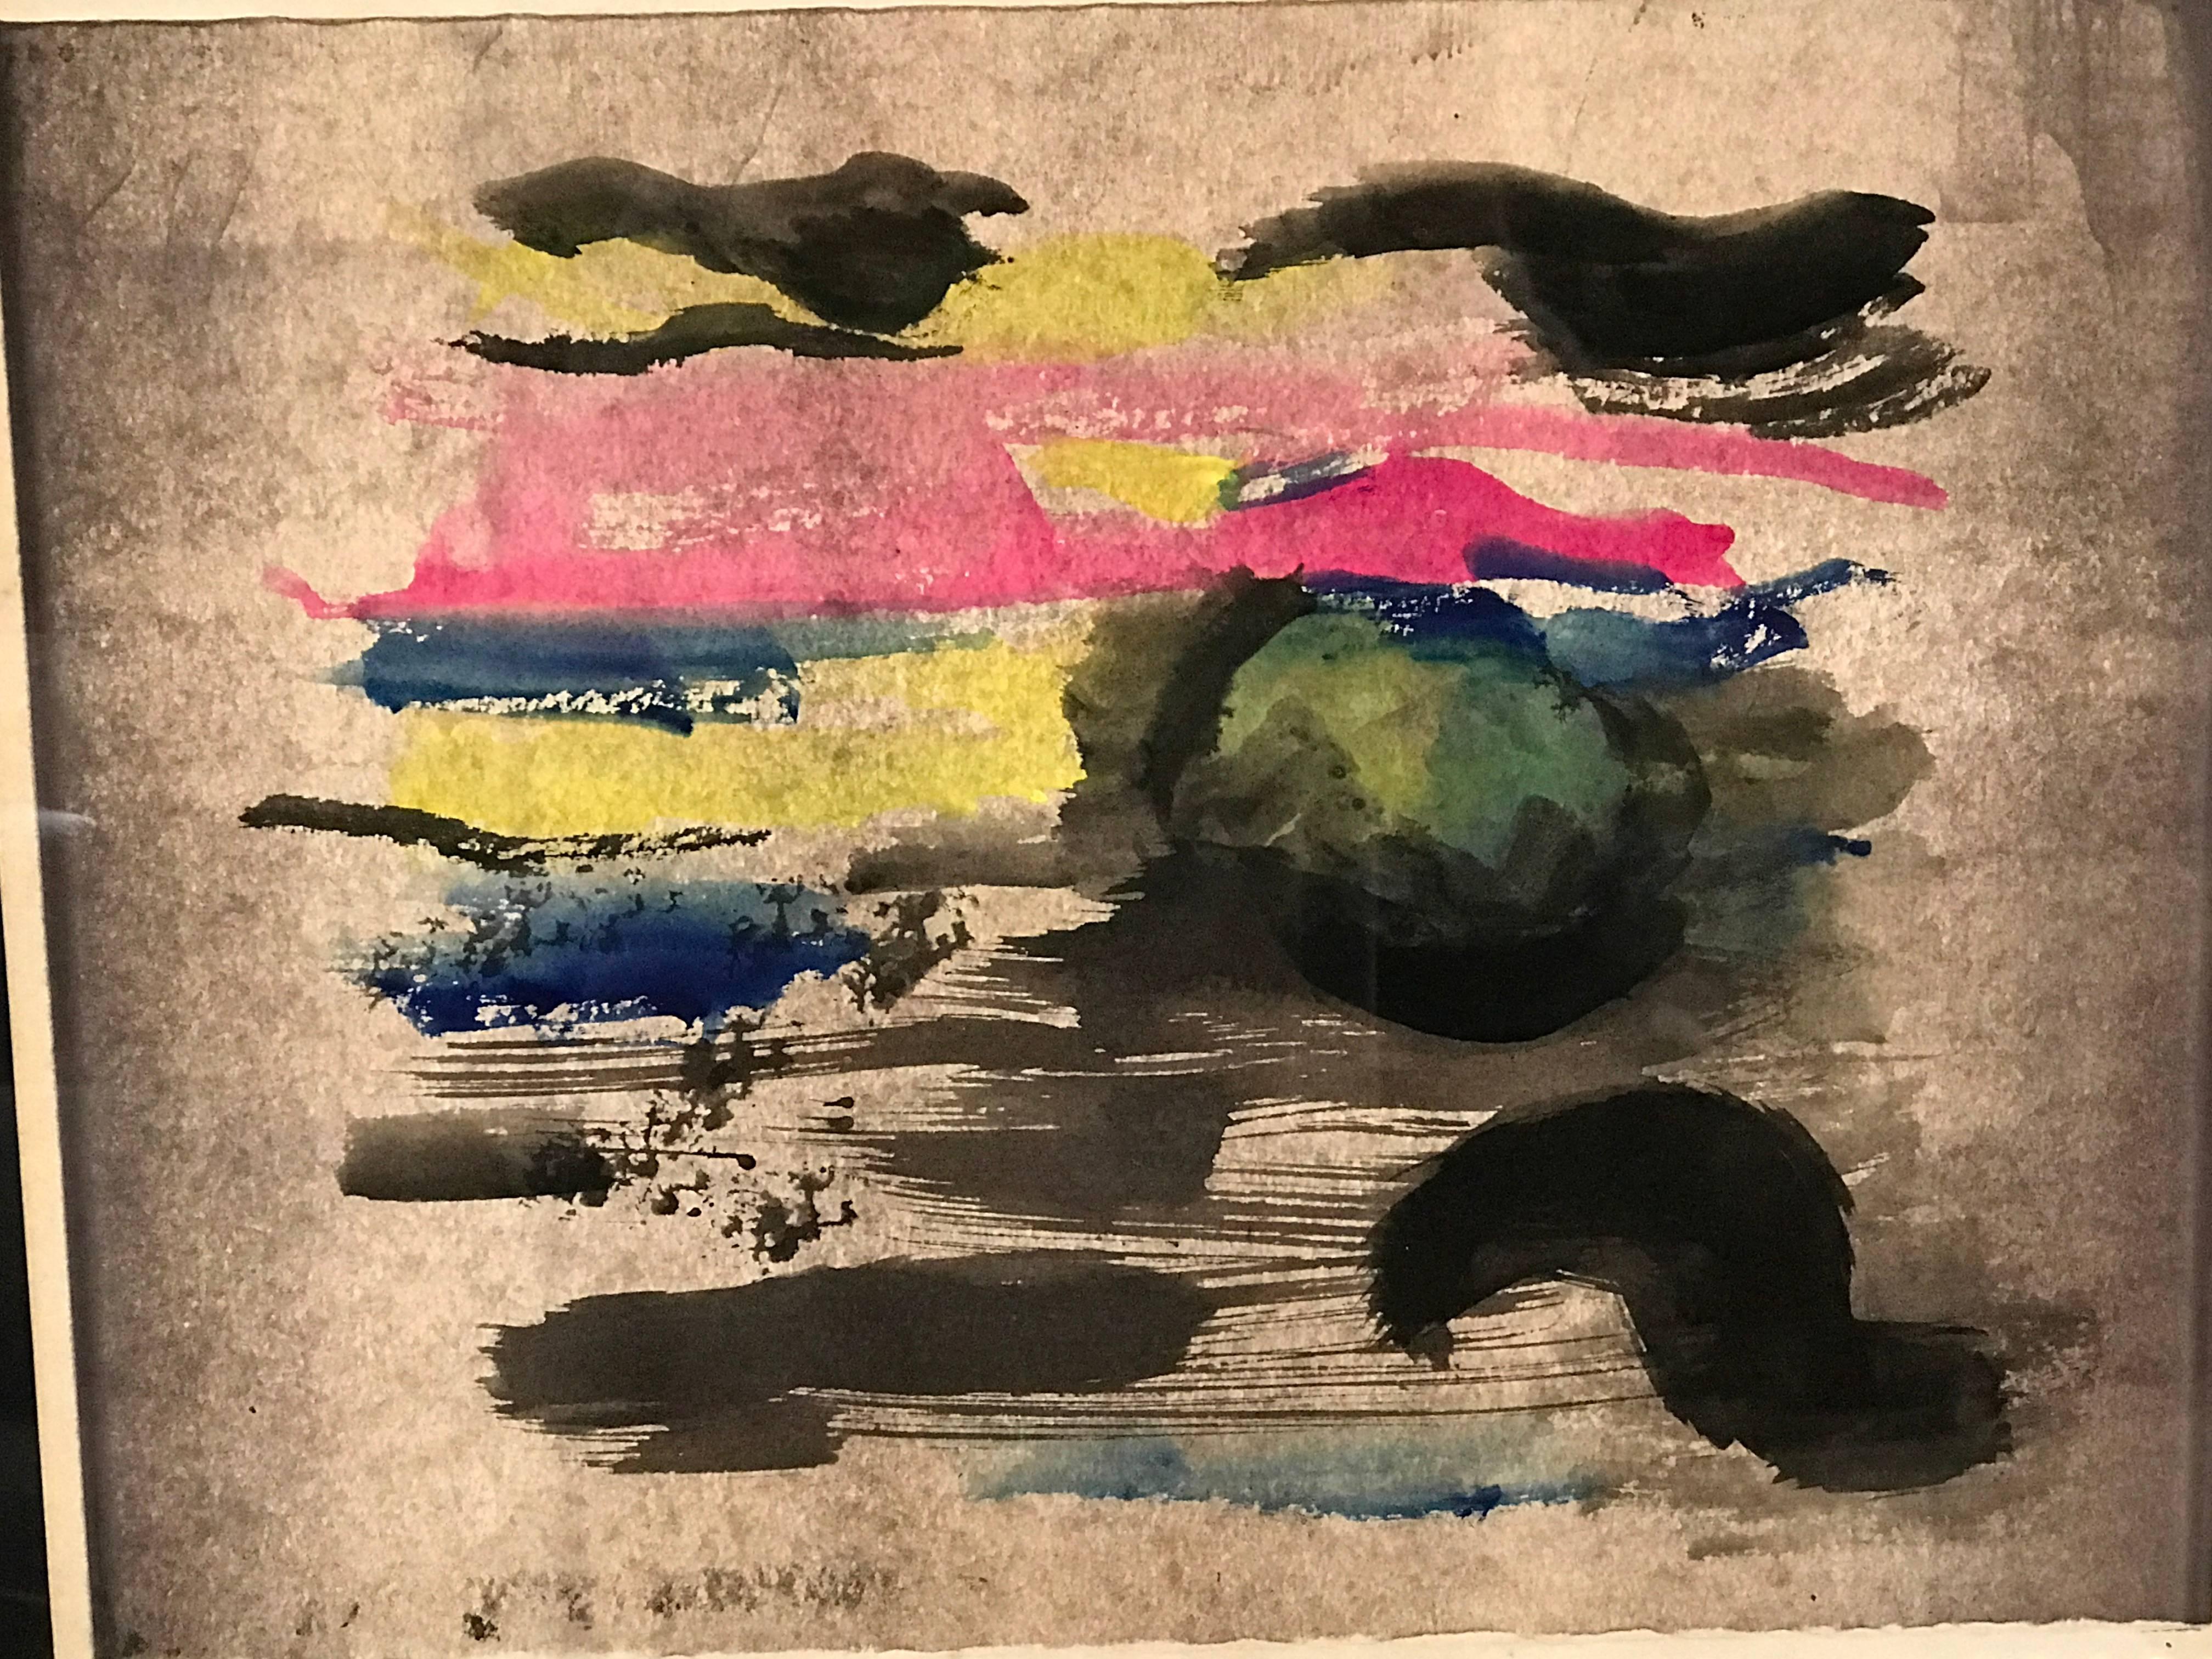 Watercolor painting by France Cami featuring broad strokes of black, hot pink, yellow and blue on a grey ombre background.